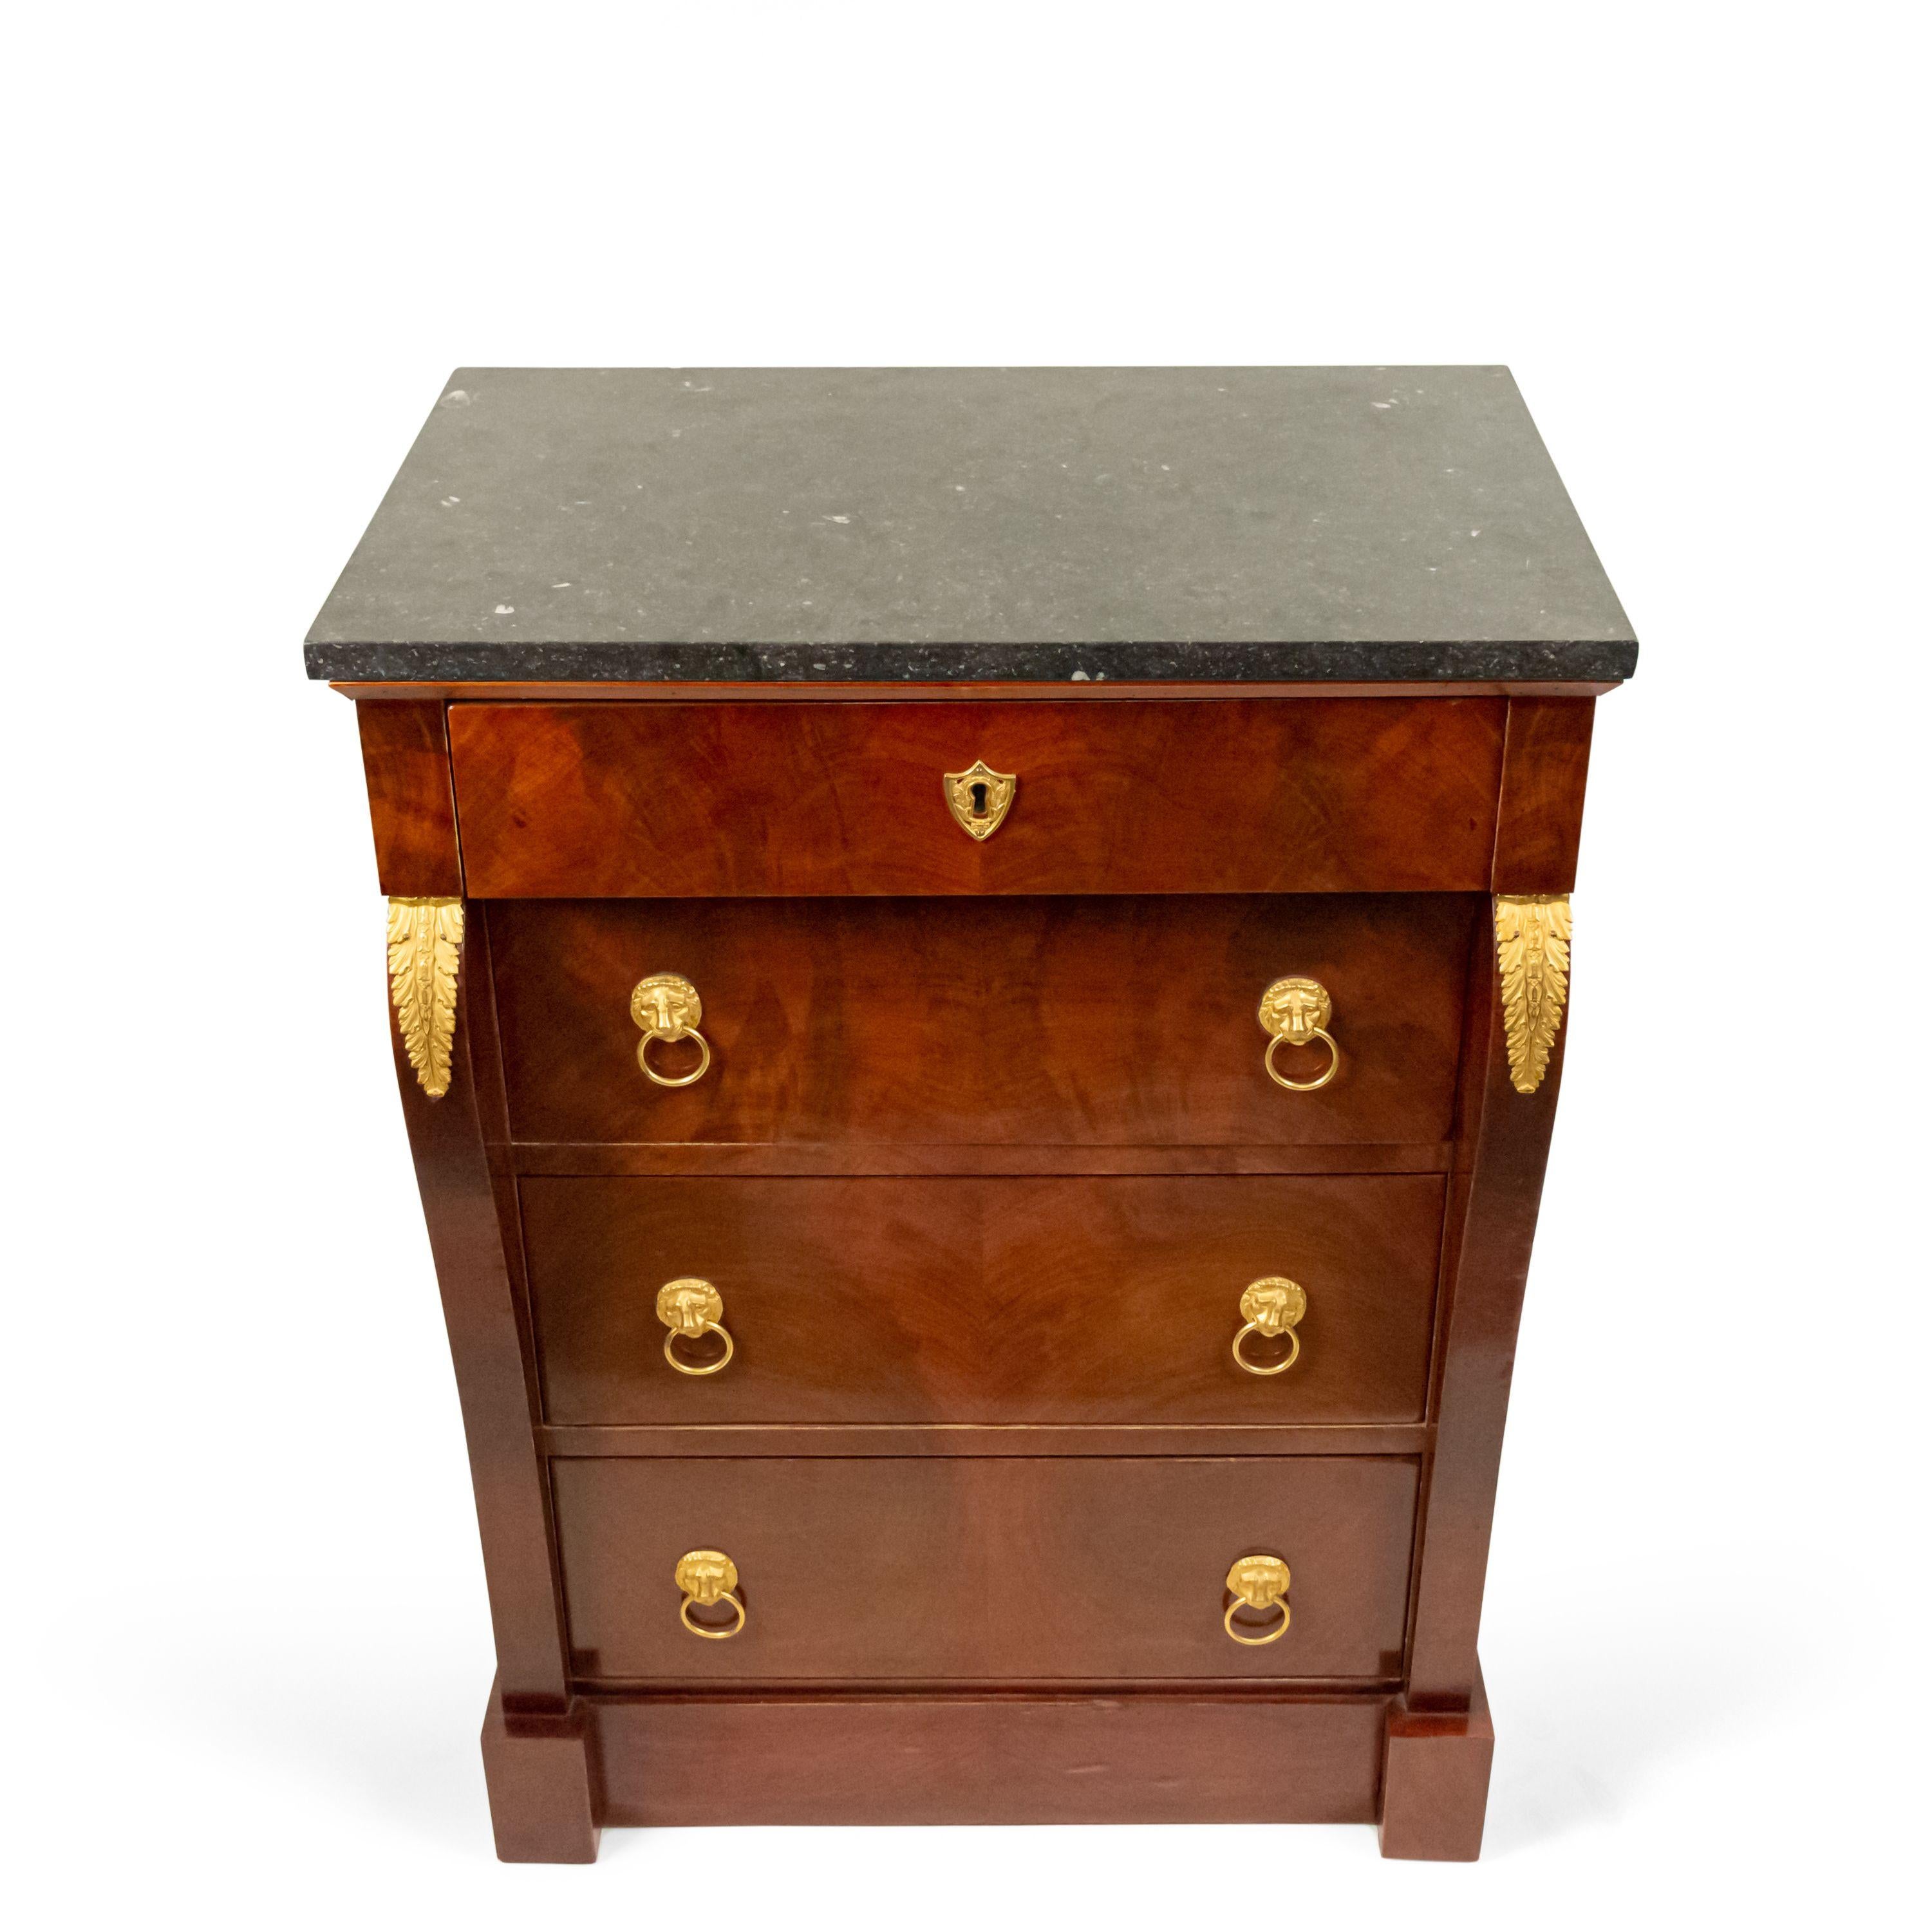 French Empire style late 19th century mahogany small chest with 4 drawers and bronze trim with a black marble top.